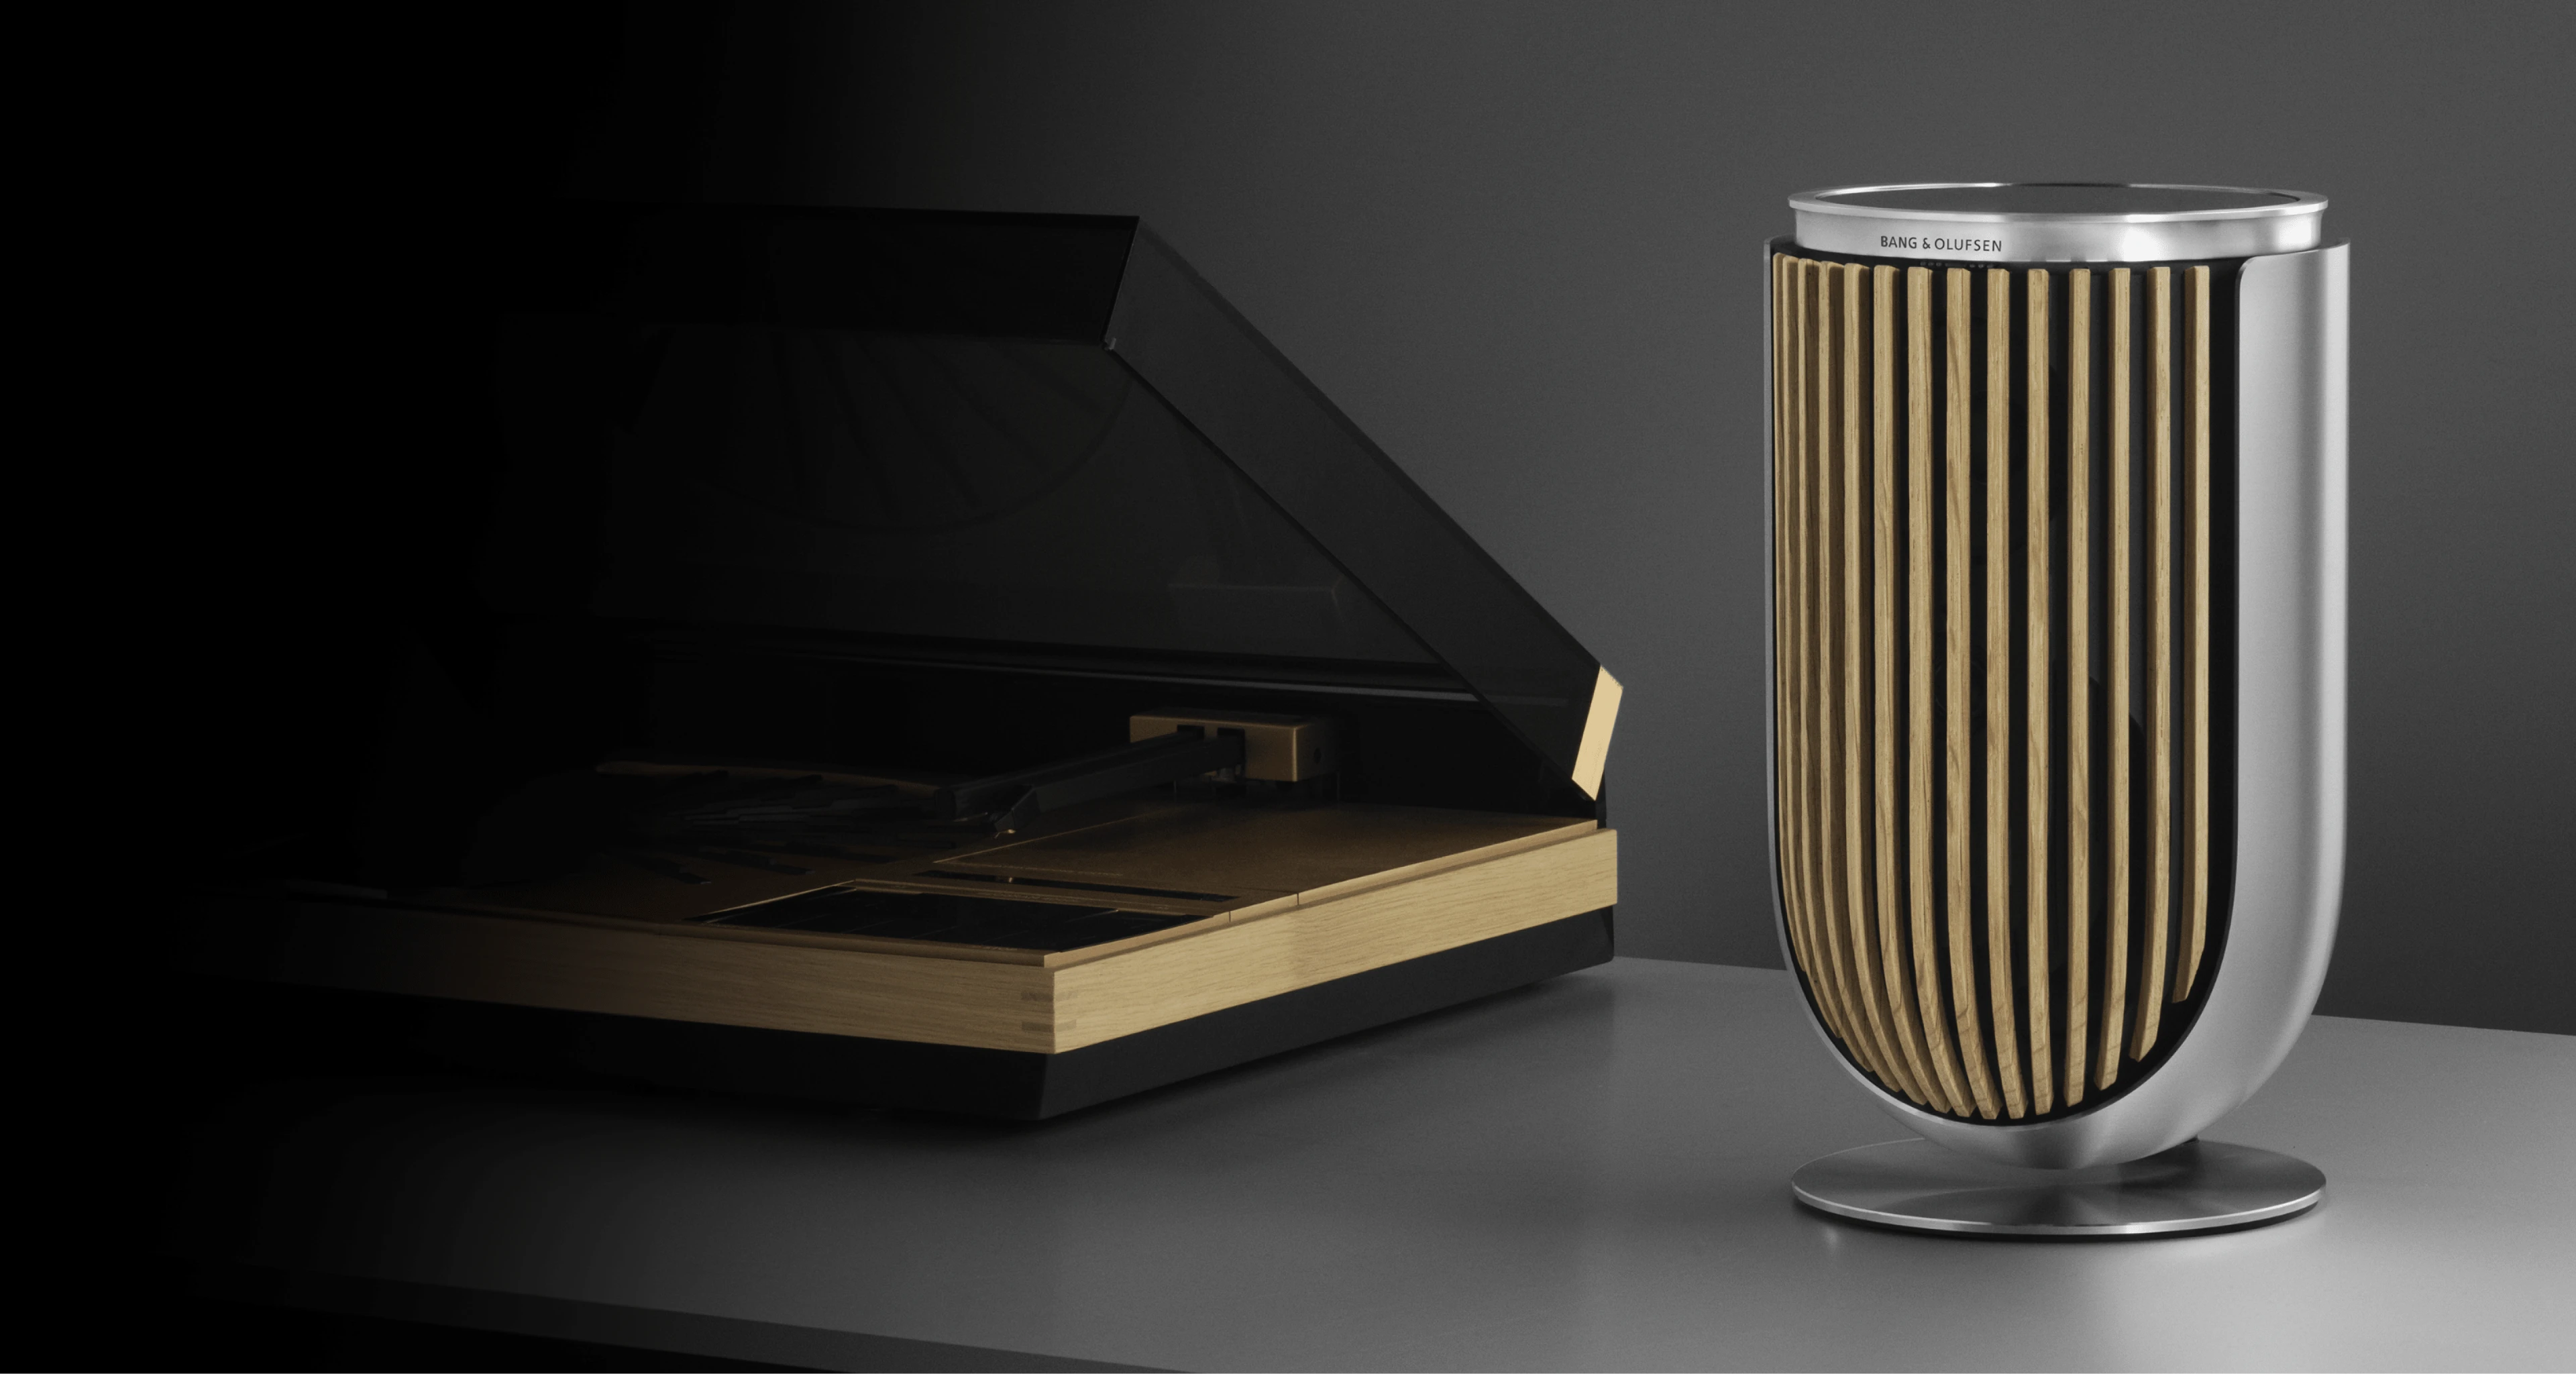 Beolab 8 speaker in natural with a wooden Oak cover on a table stand next to a Beogram 4000c record player